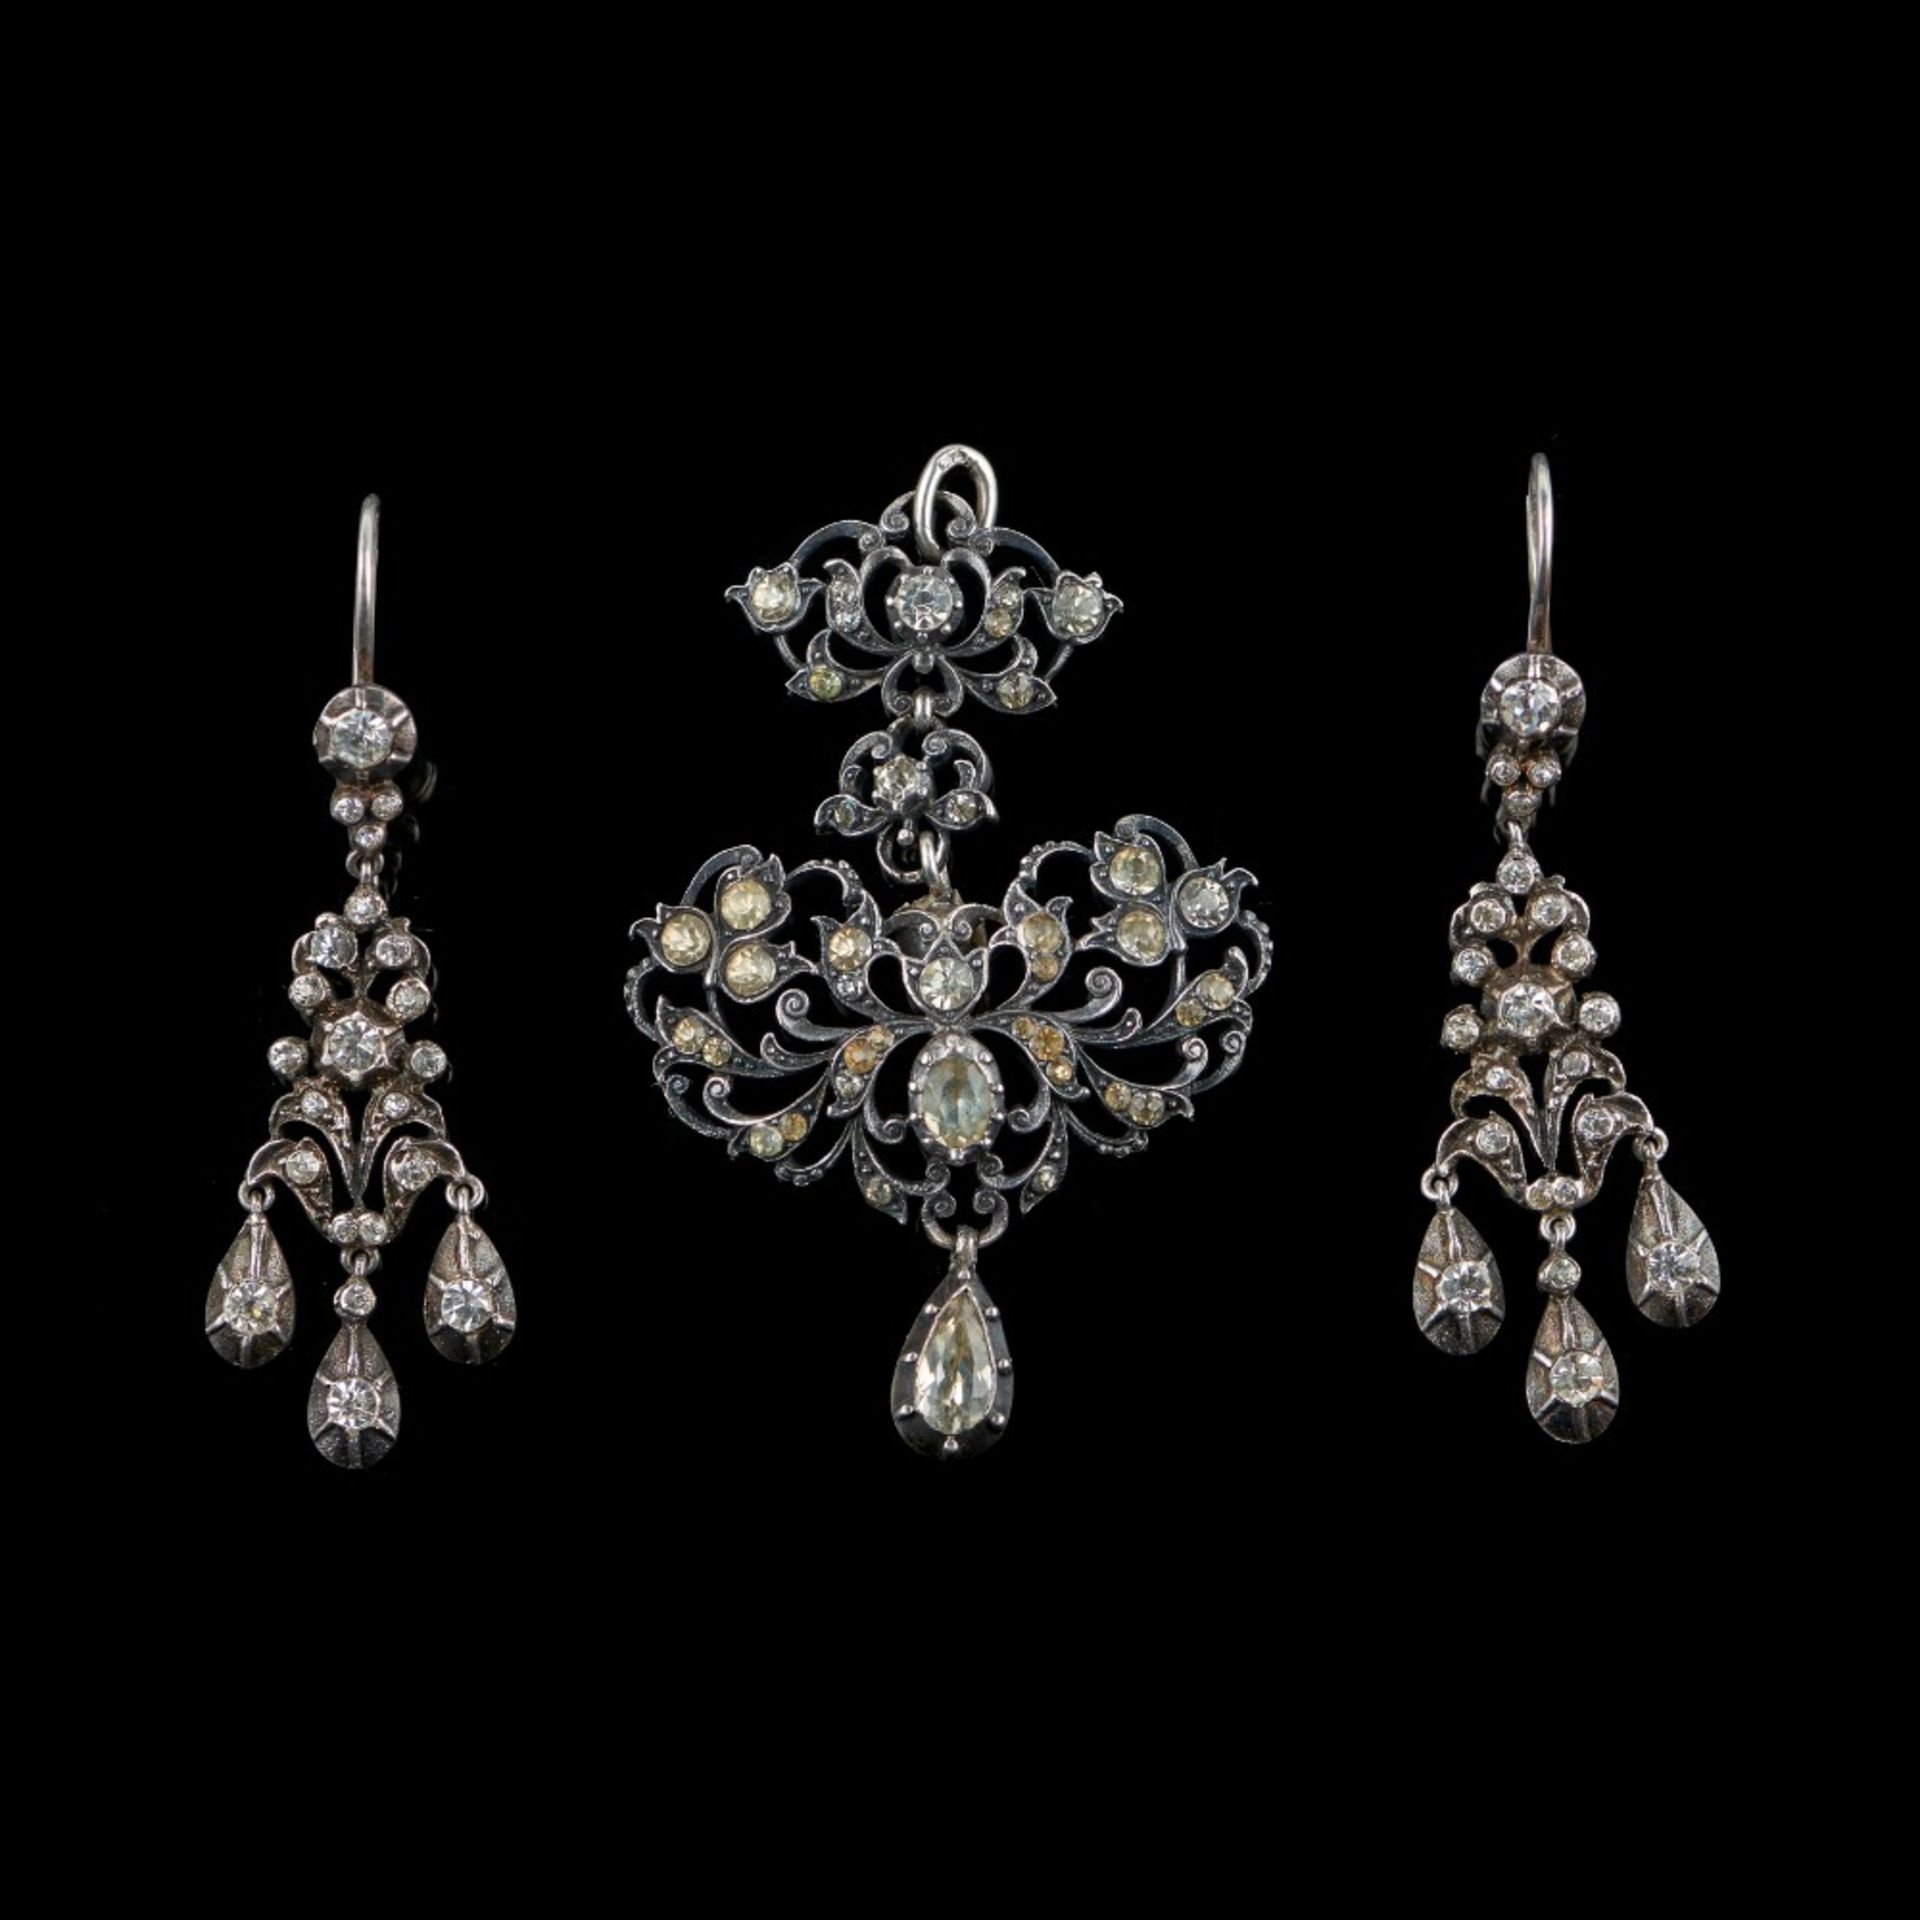  A pendant and pair of earrings